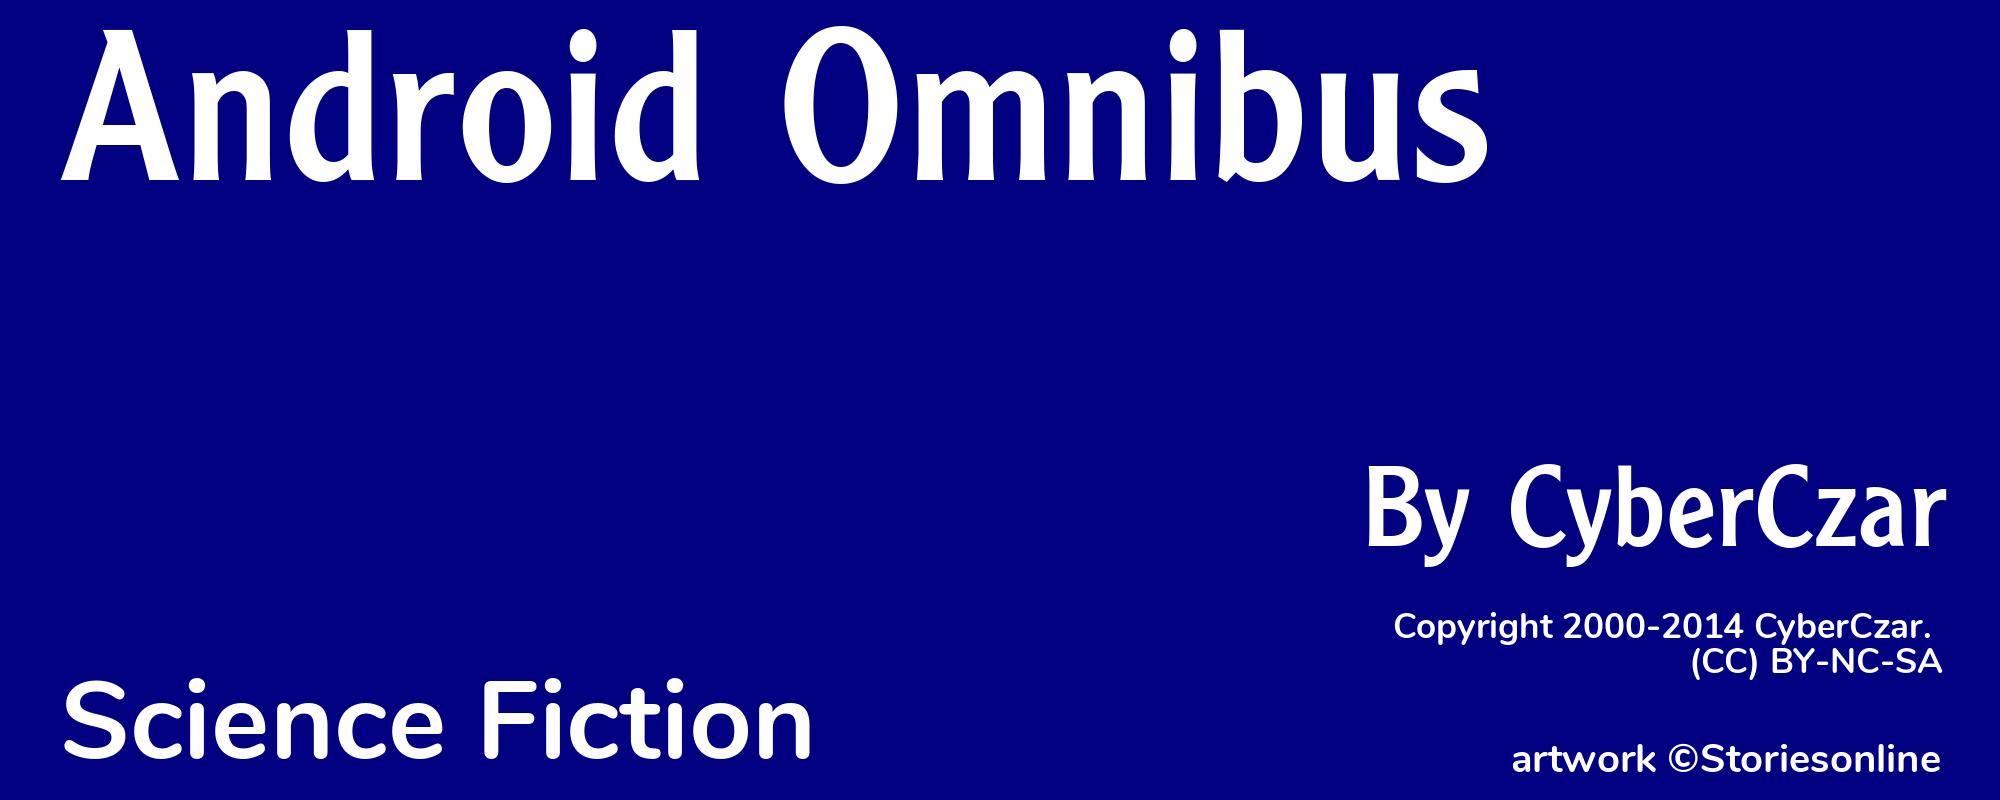 Android Omnibus - Cover